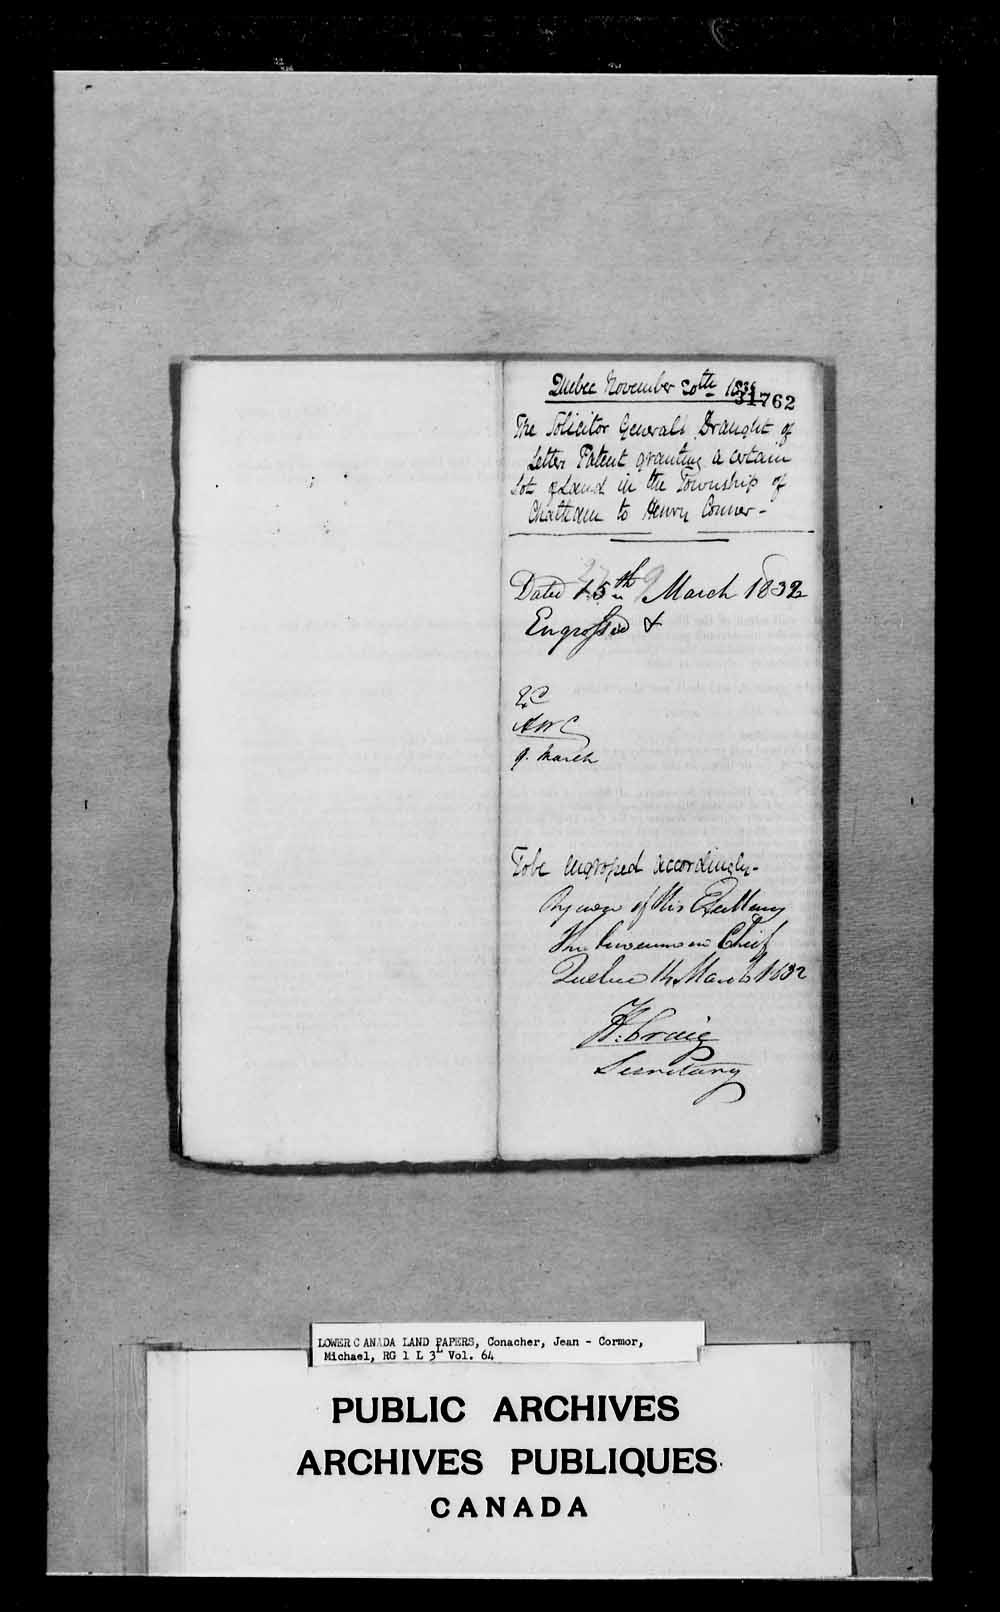 Digitized page of  for Image No.: e006616413